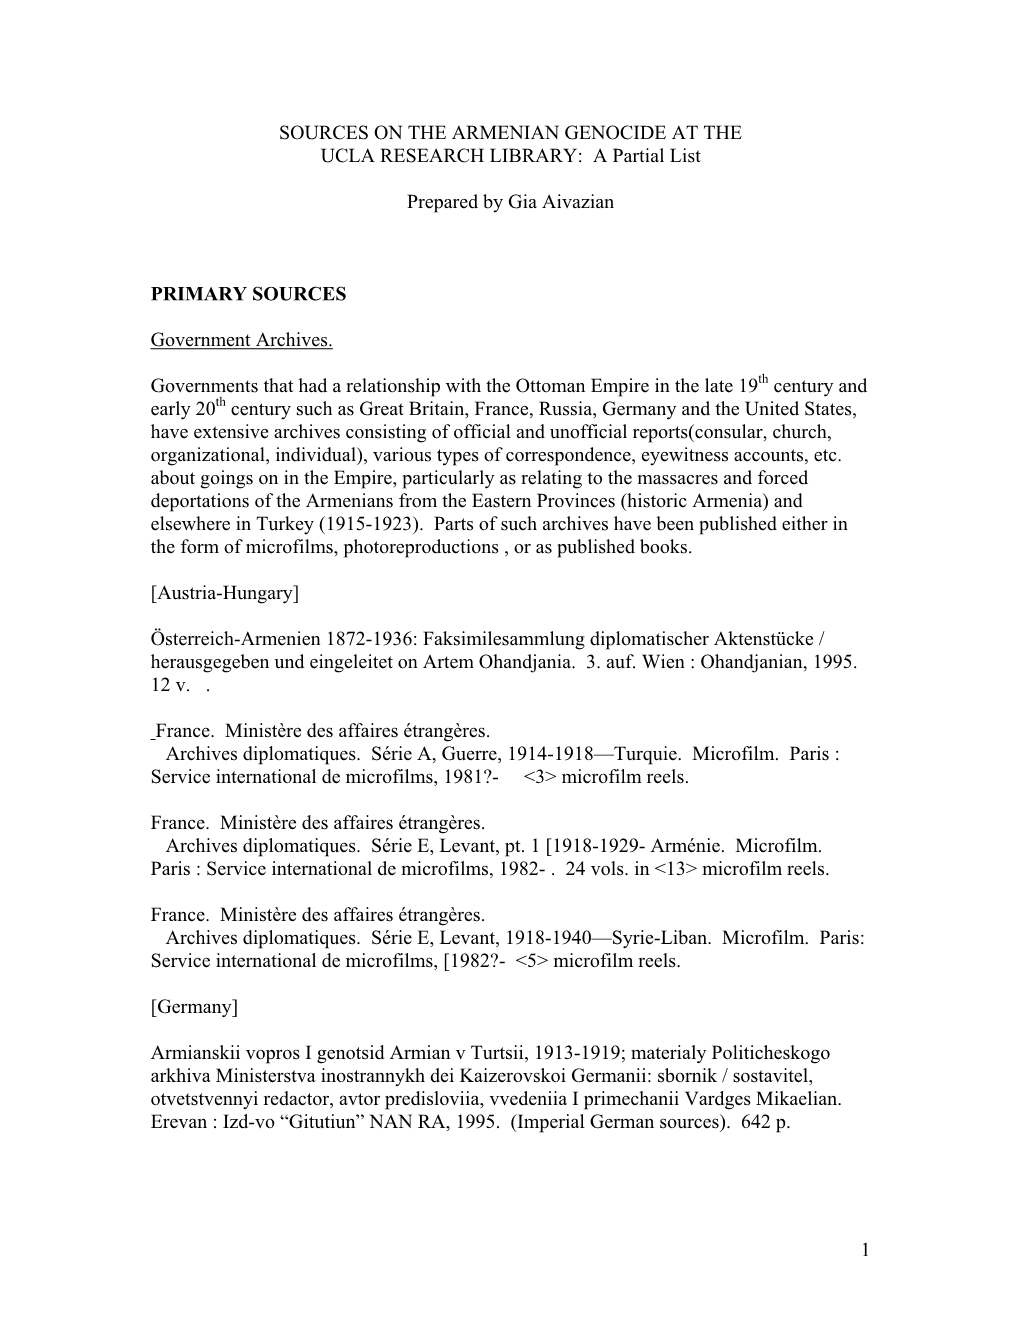 SOURCES on the ARMENIAN GENOCIDE at the UCLA RESEARCH LIBRARY: a Partial List